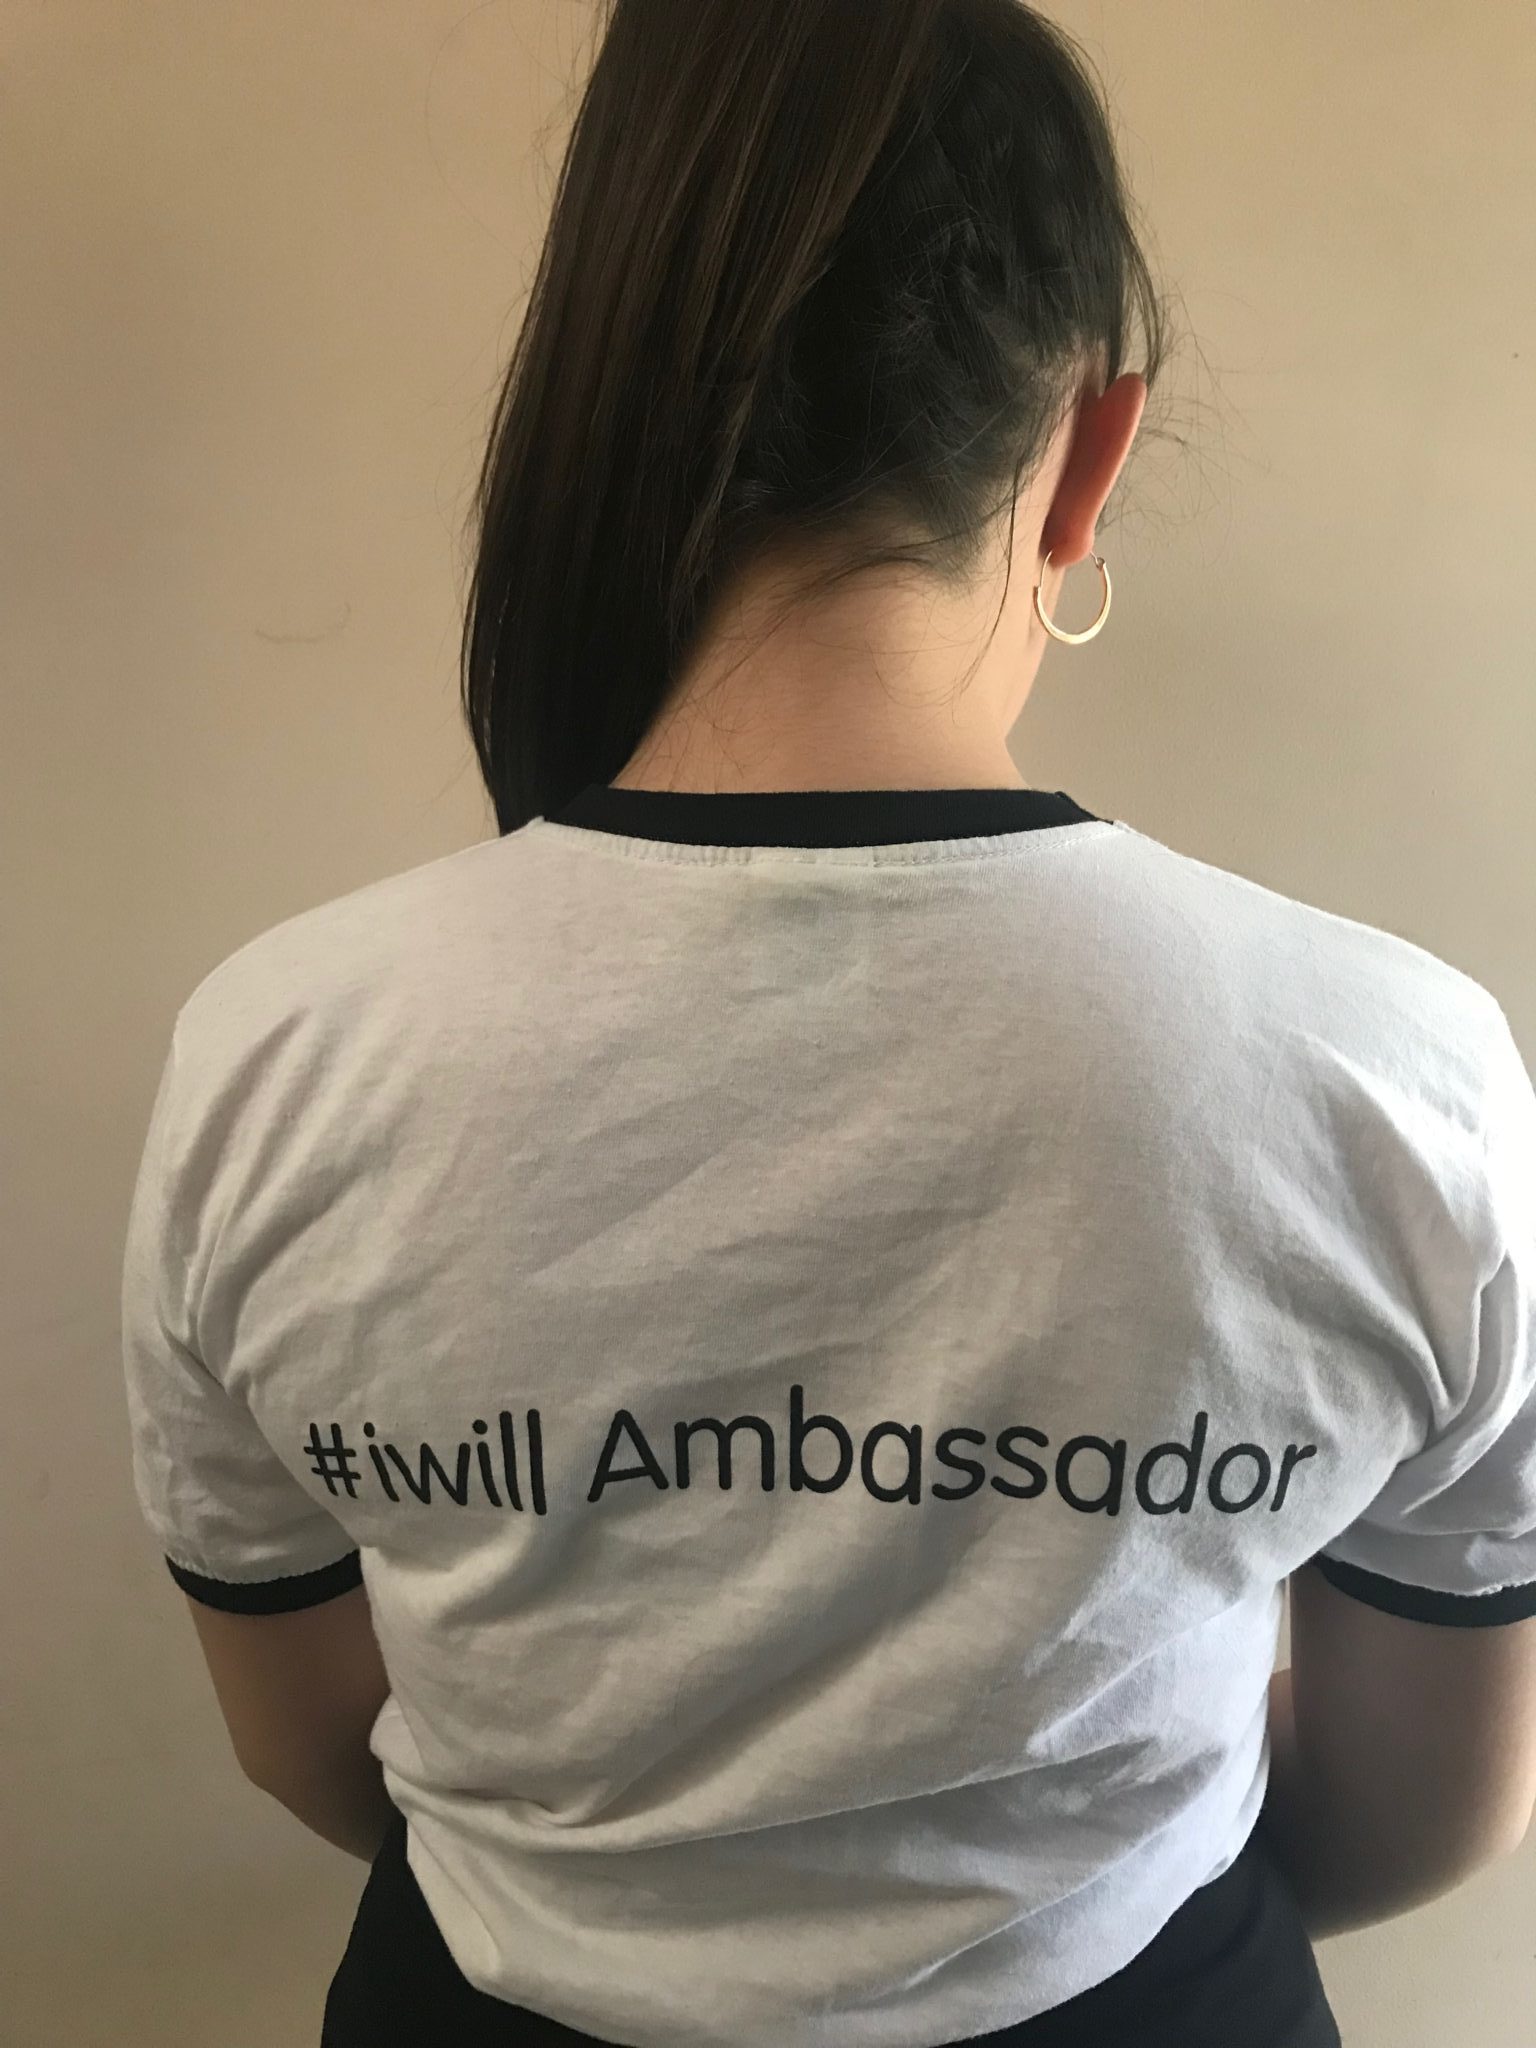 Picture of Ella smiling and wearing a t-shirt with '#iwill Ambassador' written on the back